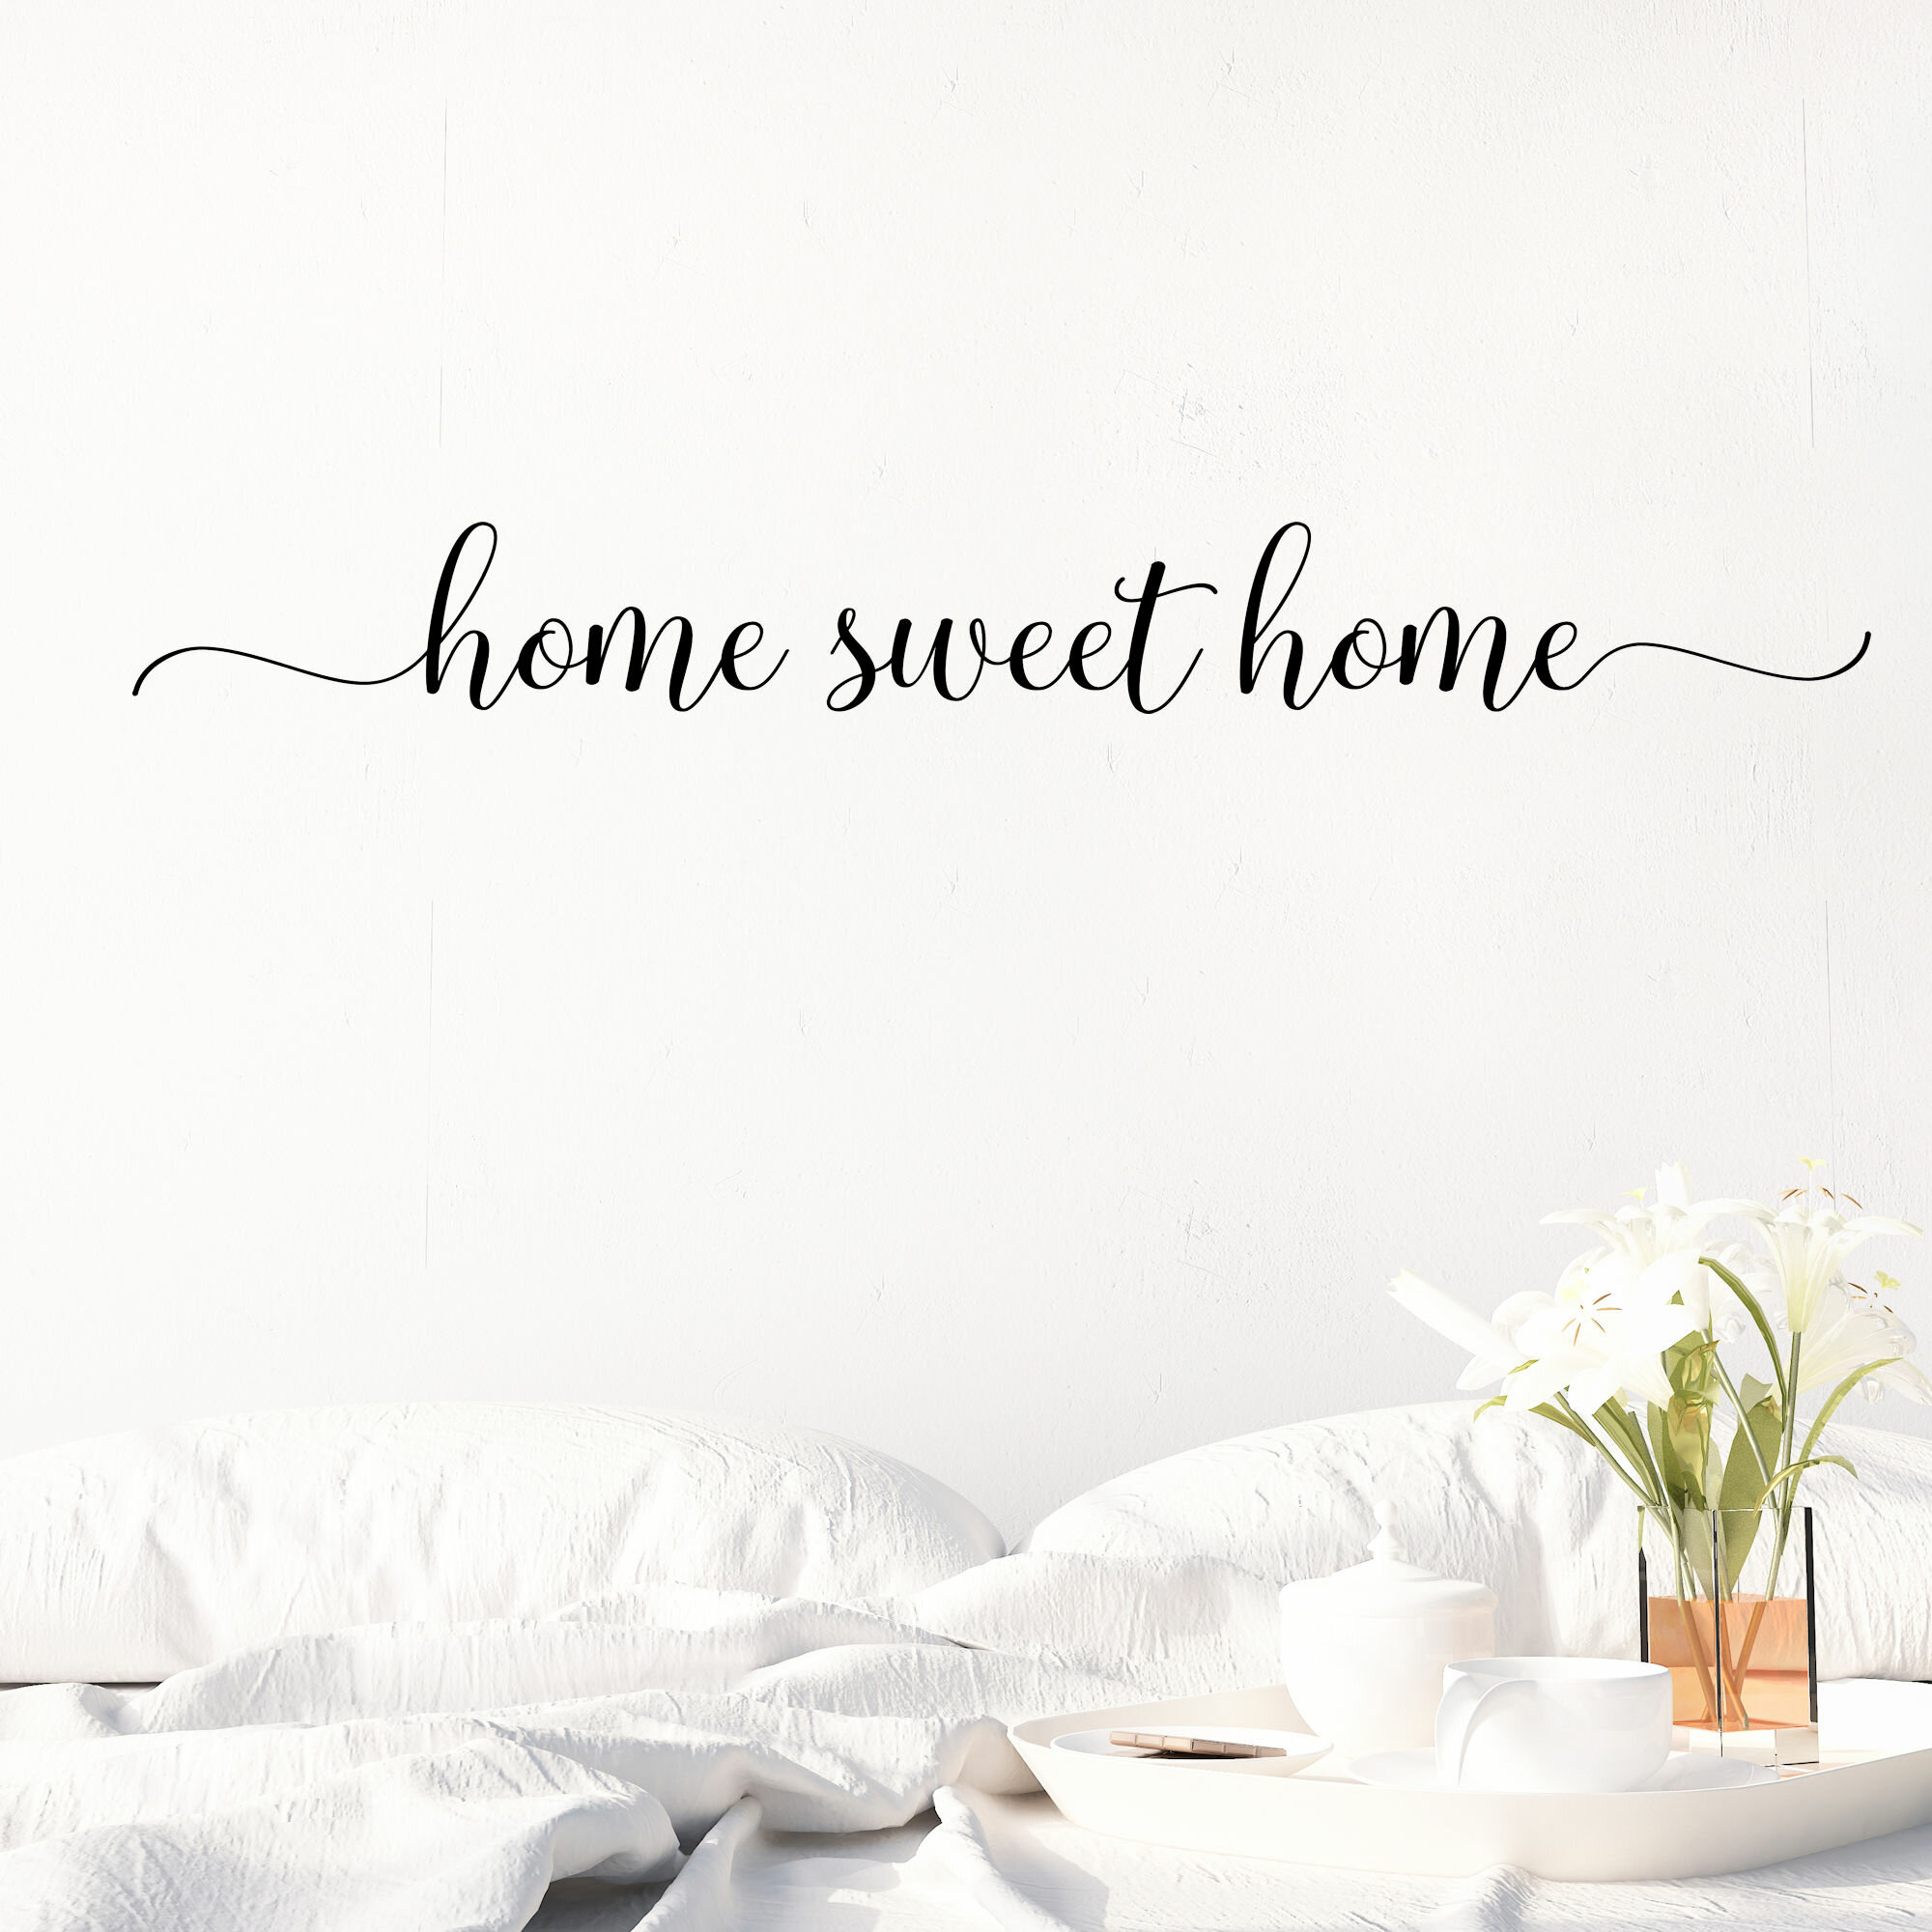 Beautiful Wall Stickers DIY PVC Vinyl Home Sweet Home Wall Stickers NR7